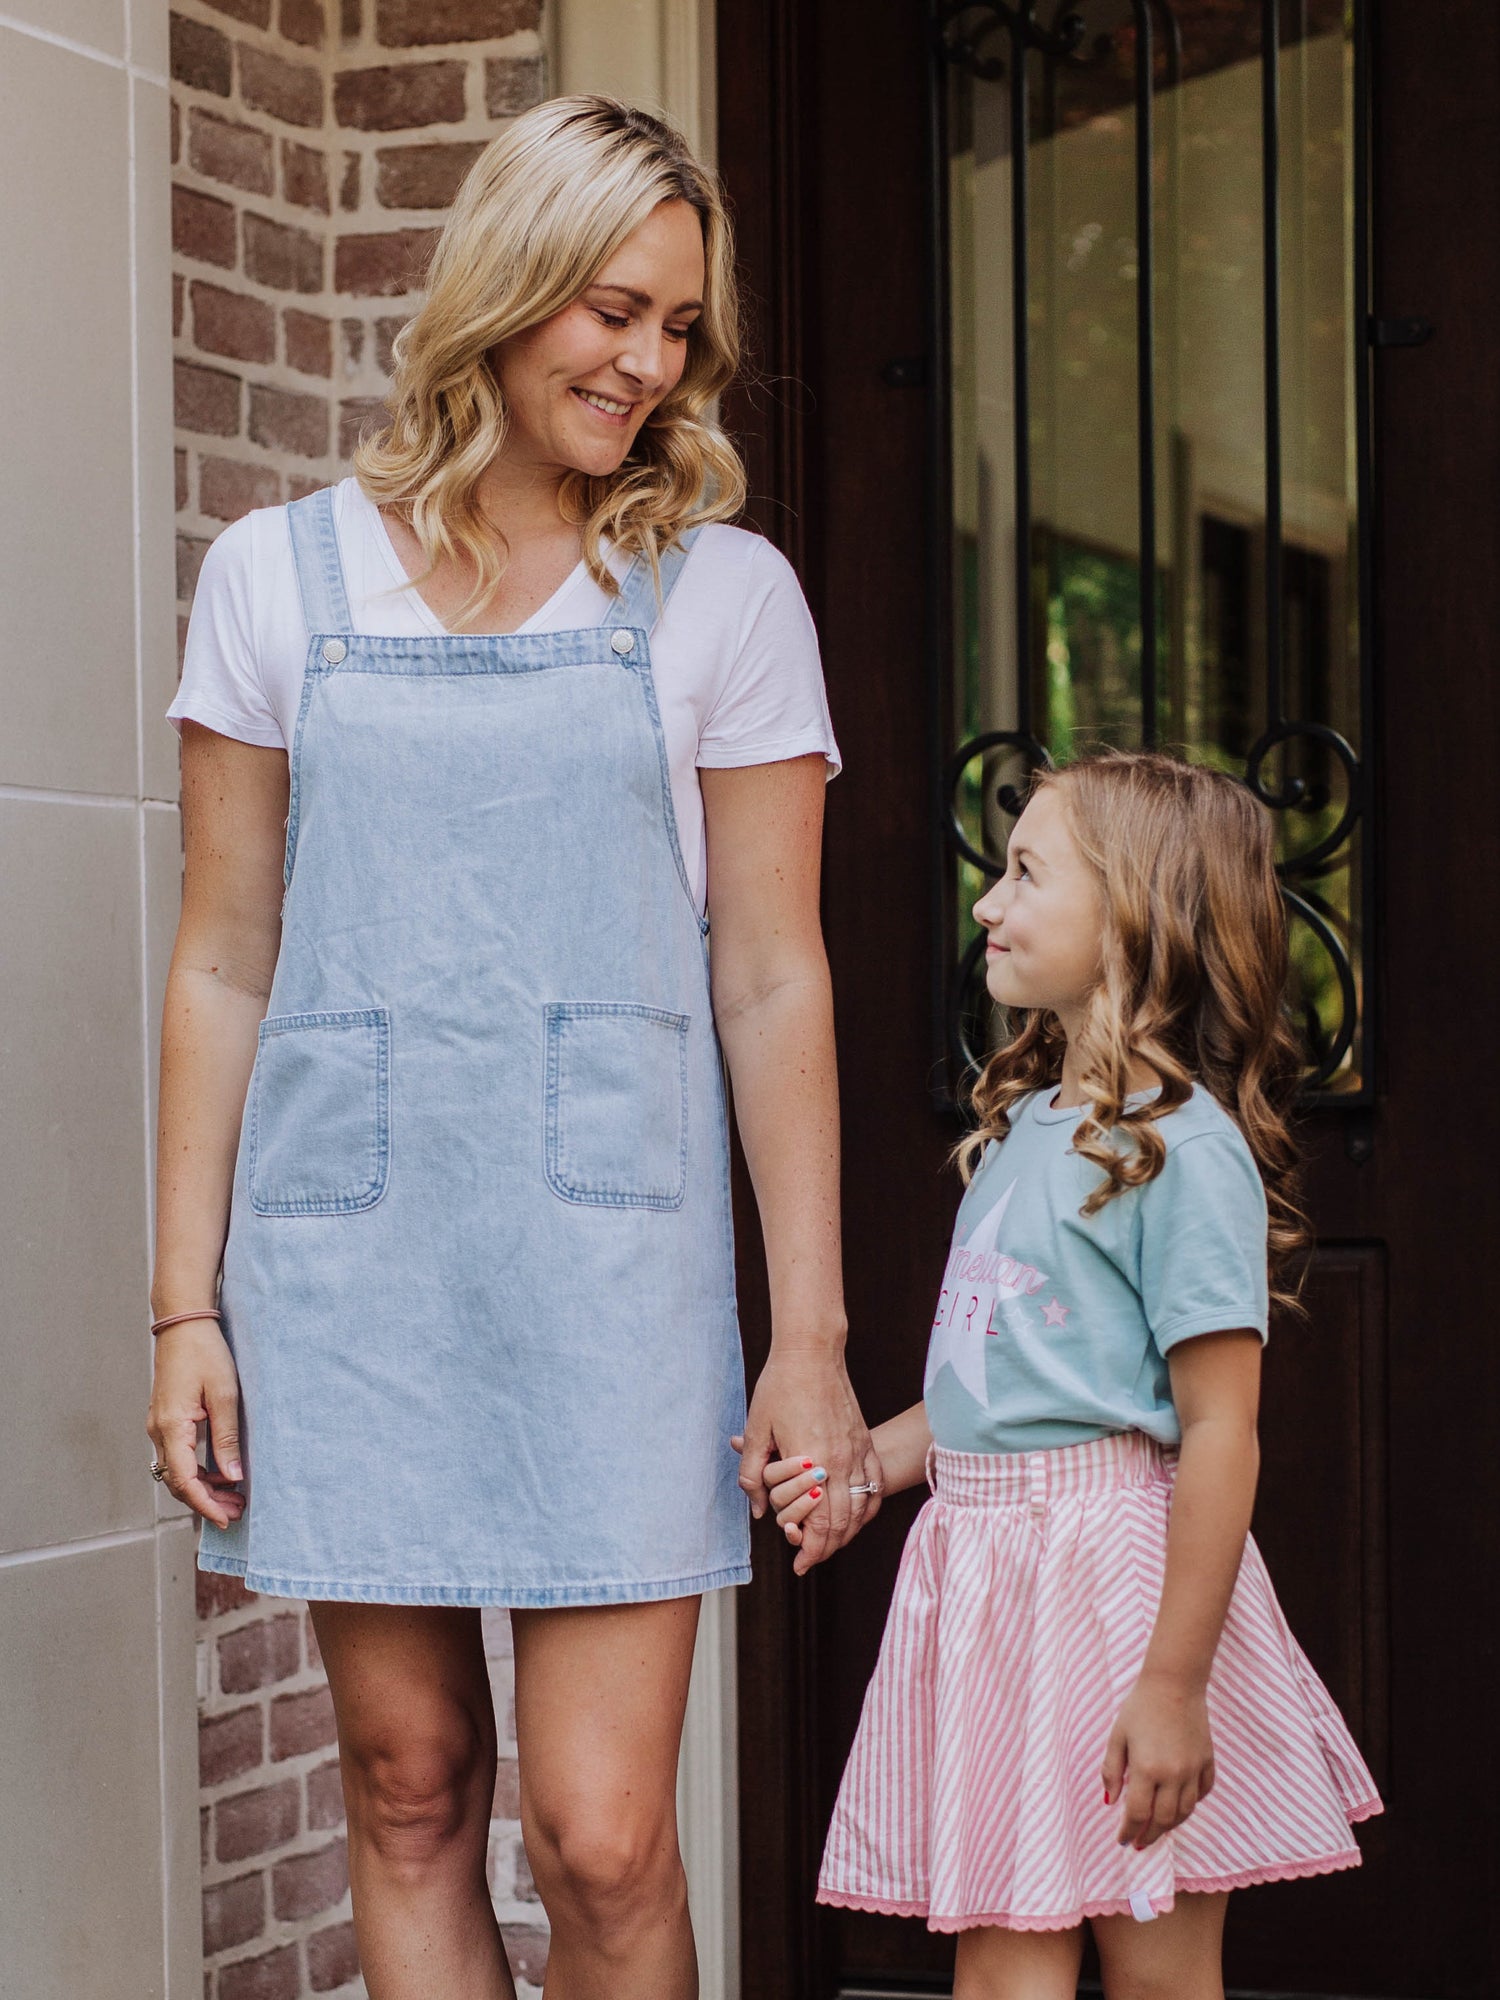 Buy Spanye Women Denim Dress Baggy Overalls Jumpsuit Casual Strap Bib  A-Line Dress with Pockets (Light Blue, Large) at Amazon.in